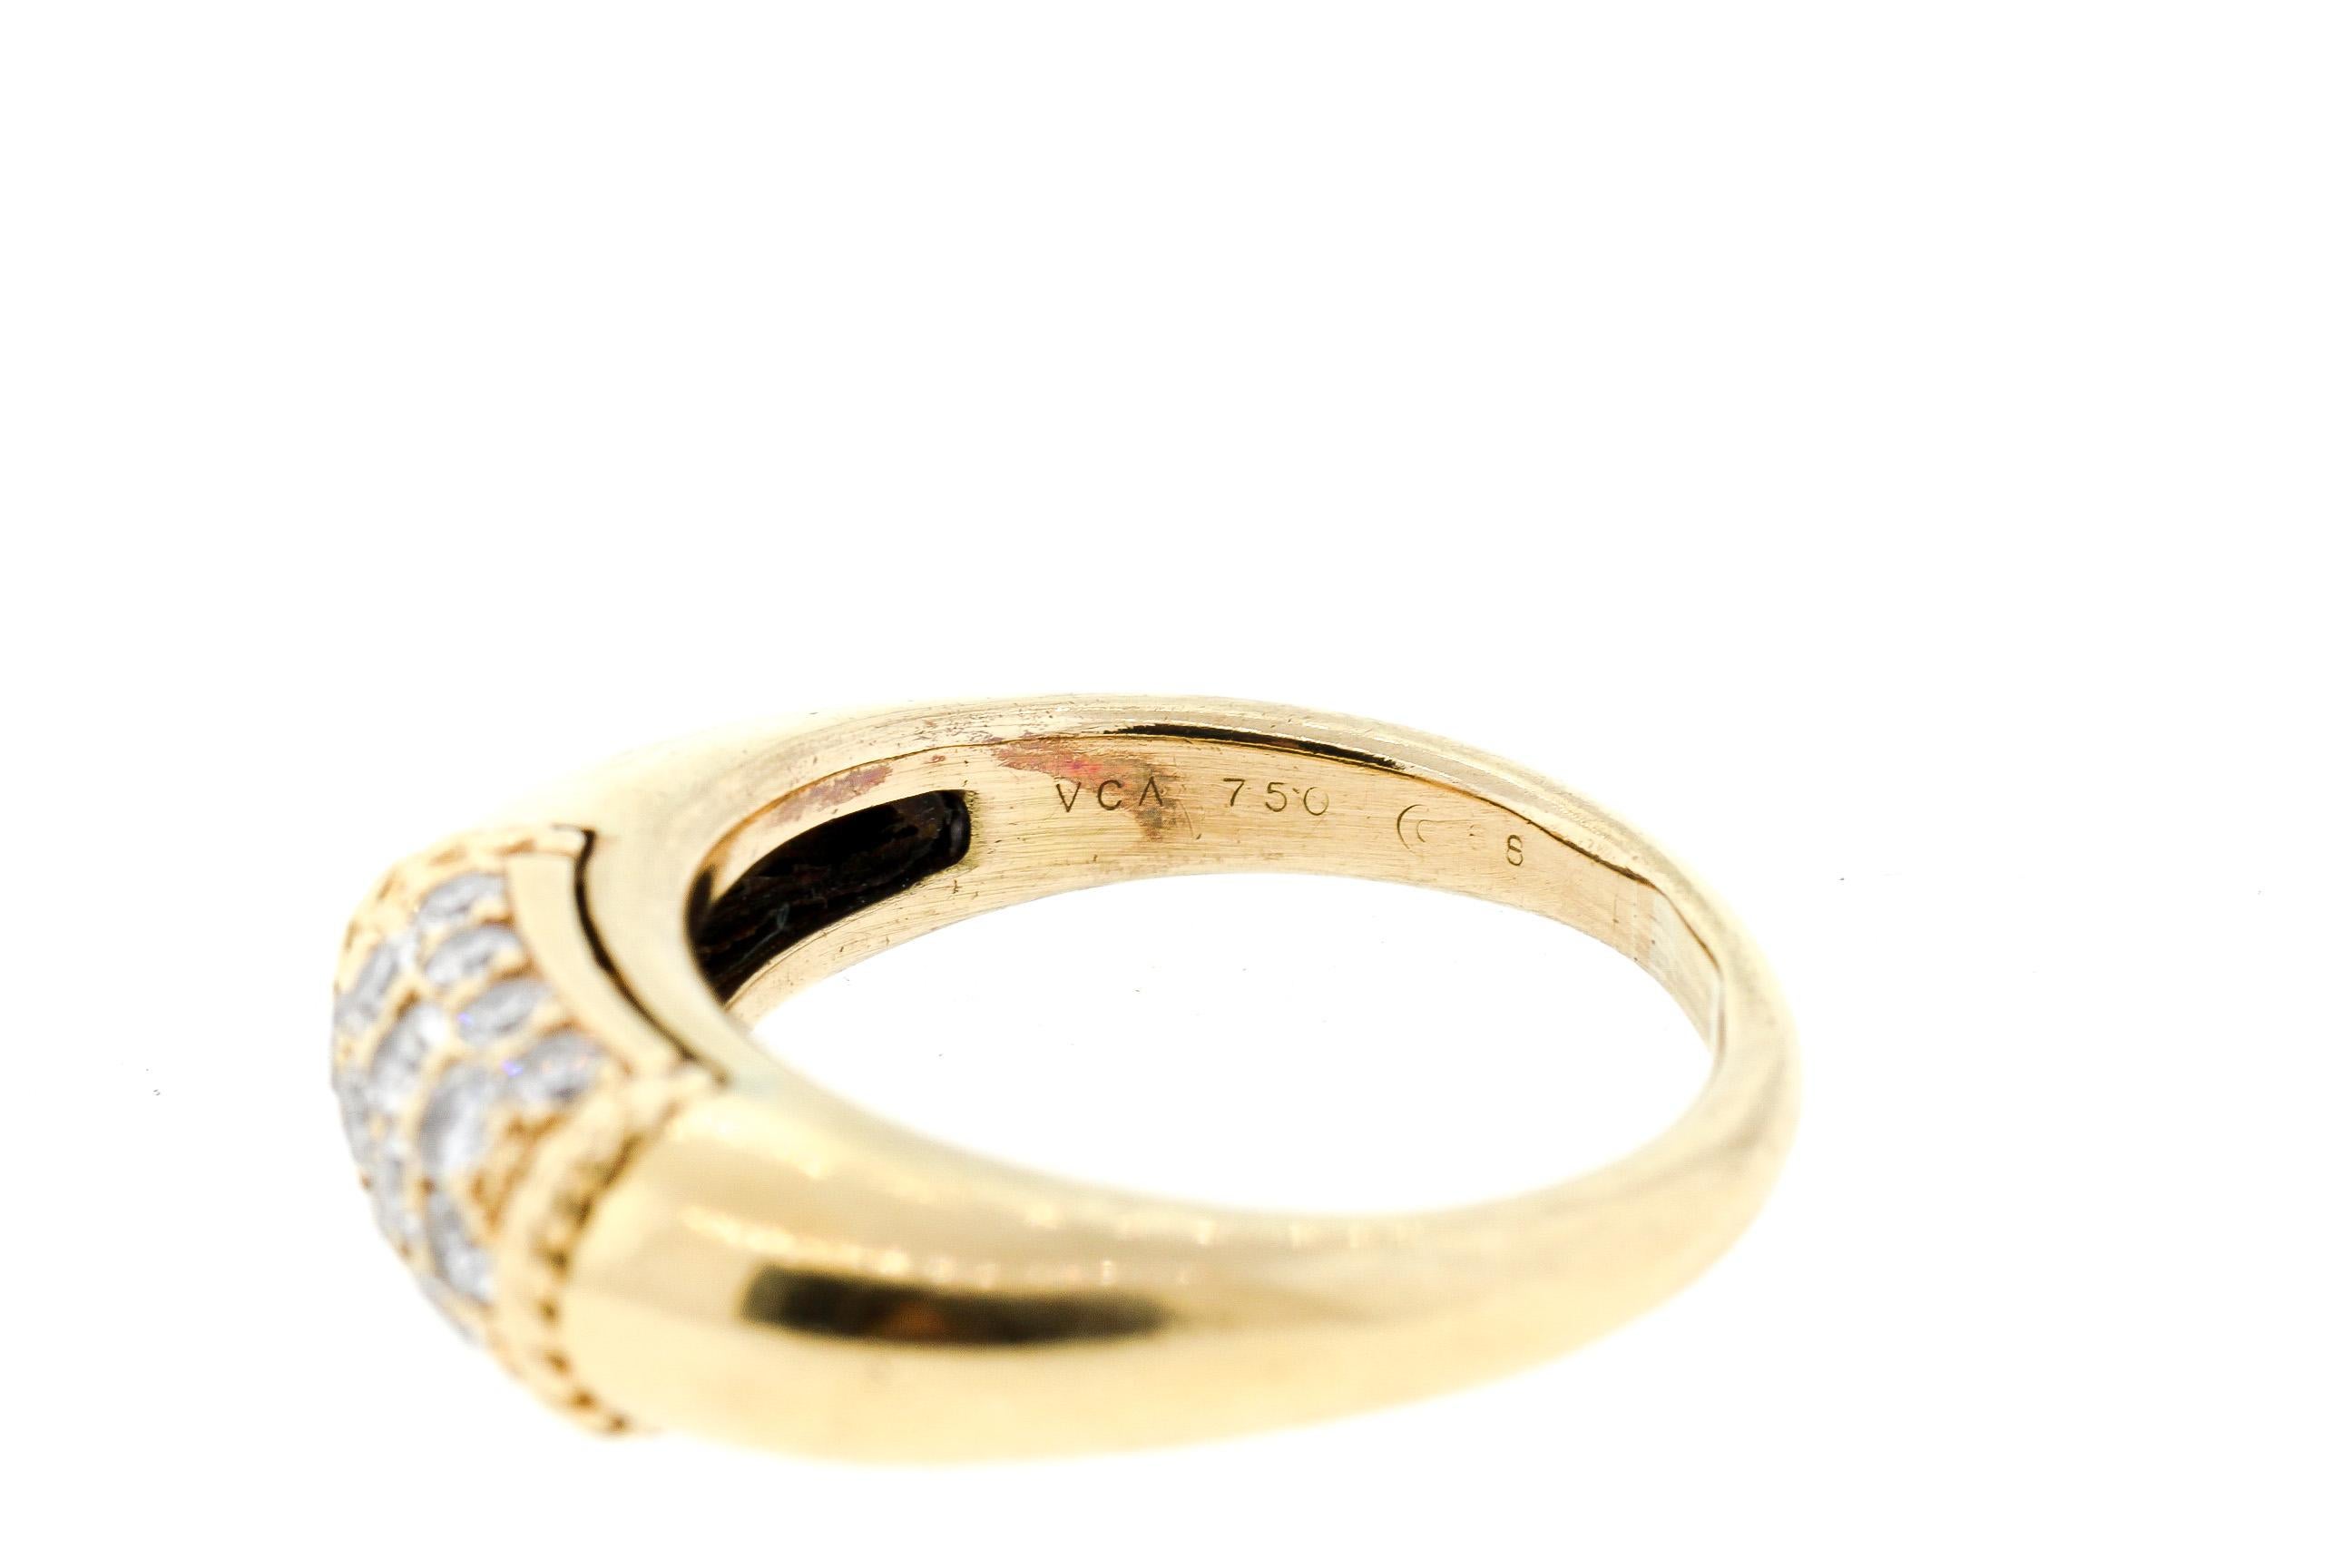 18k gold wedding ring price in philippines